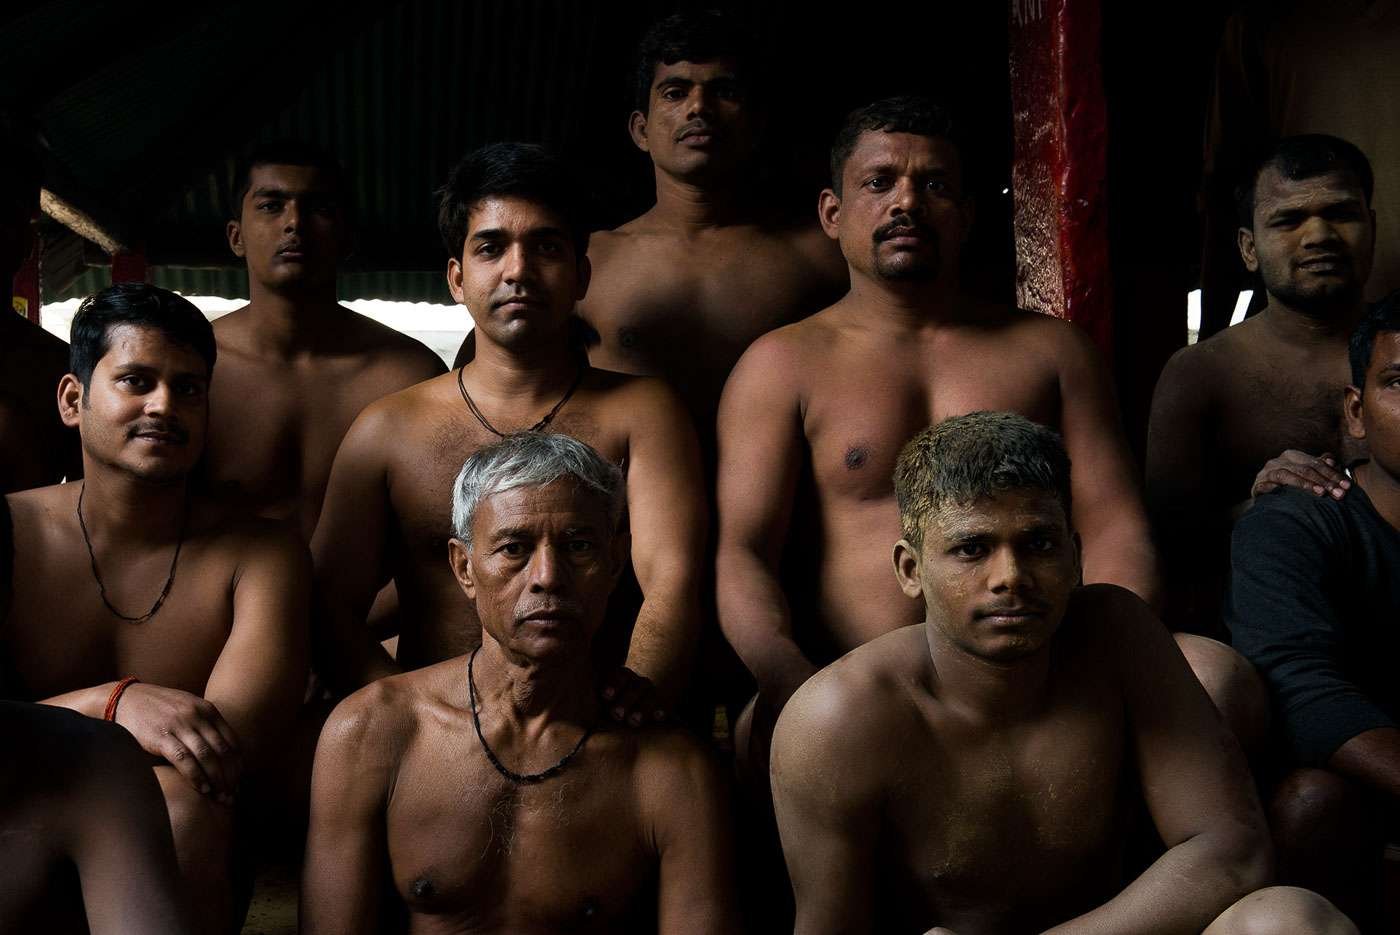 Kushti wrestlers share a camaraderie born of a shared way of life and life goals.